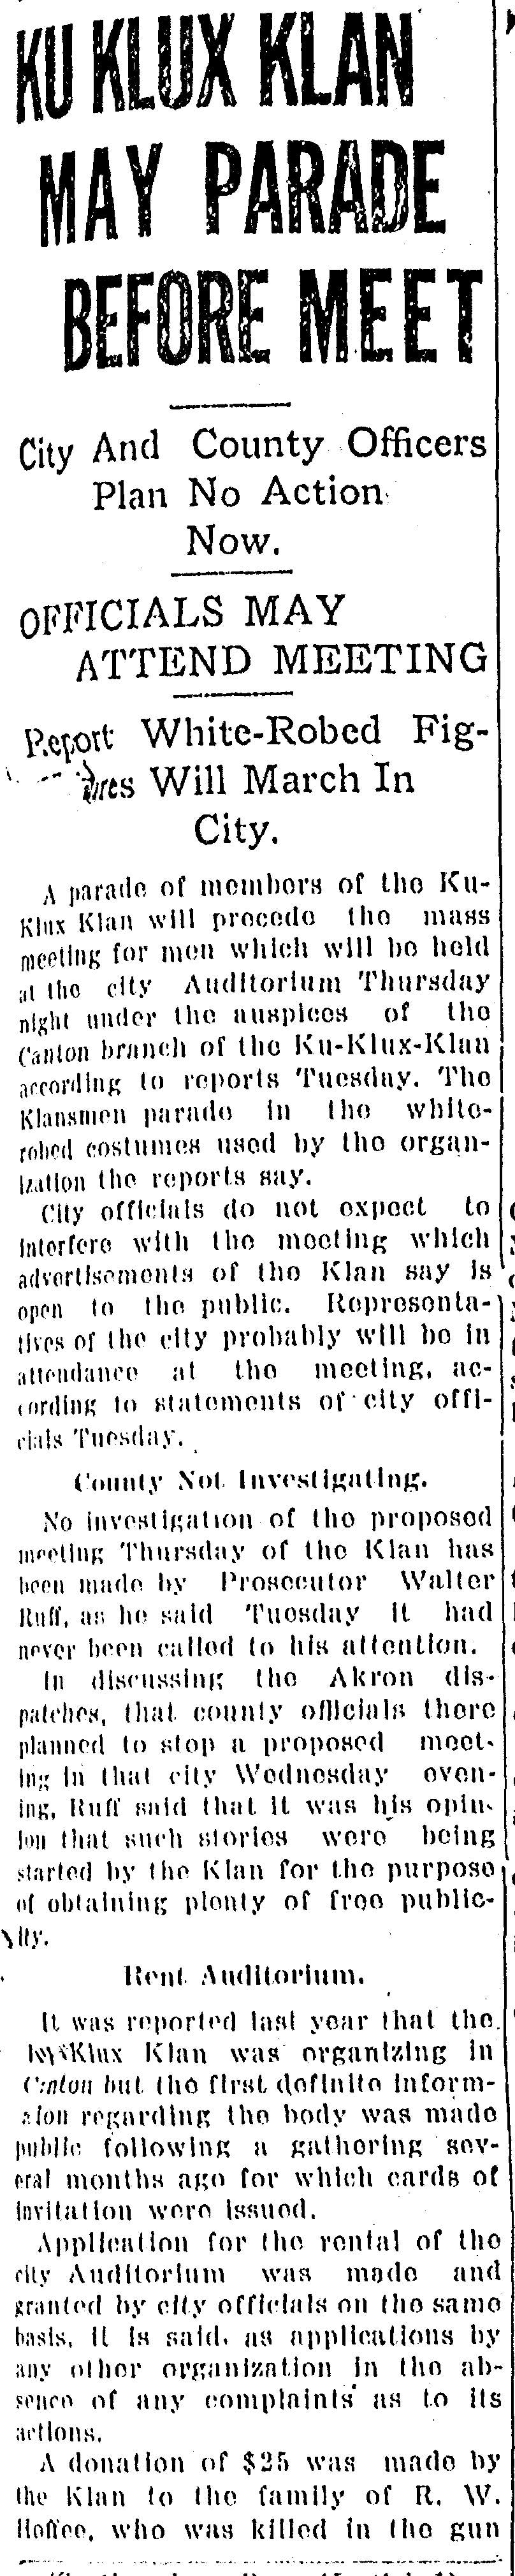 Another Canton Repository story detailed activities expected when the Ku Klux Klan gathered in 1922 in Canton.